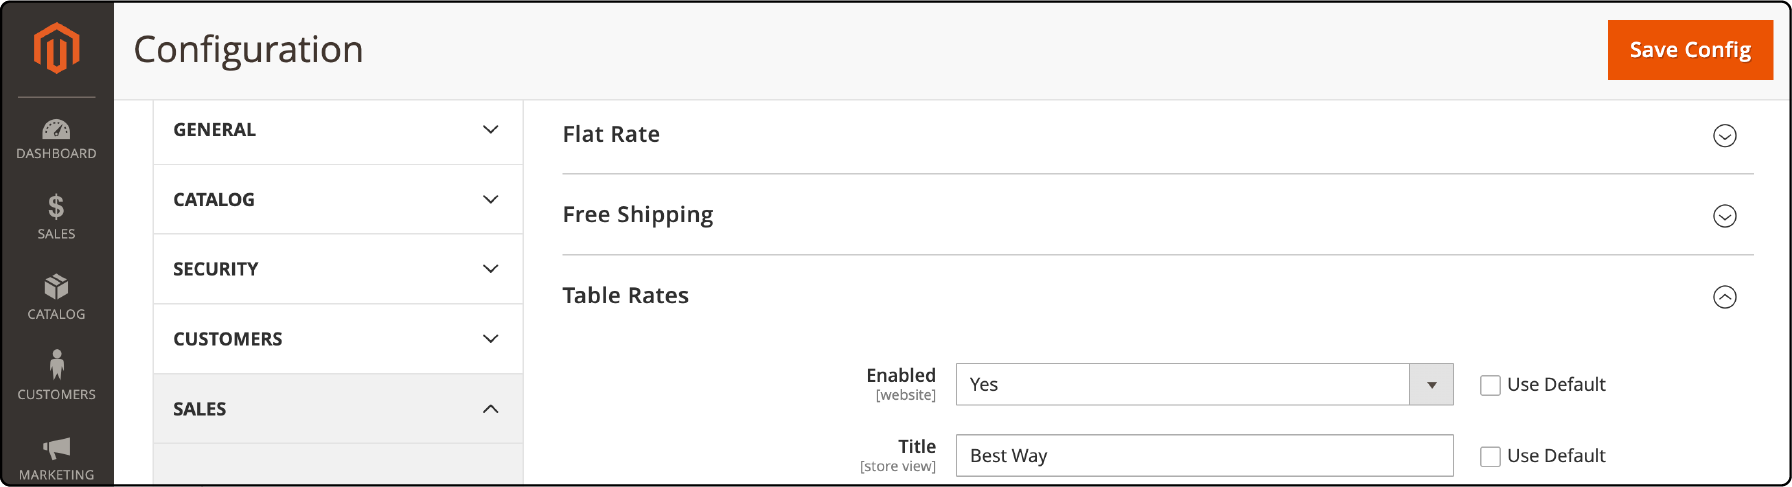 Saving configuration settings after importing CSV for Magento 2 table rates